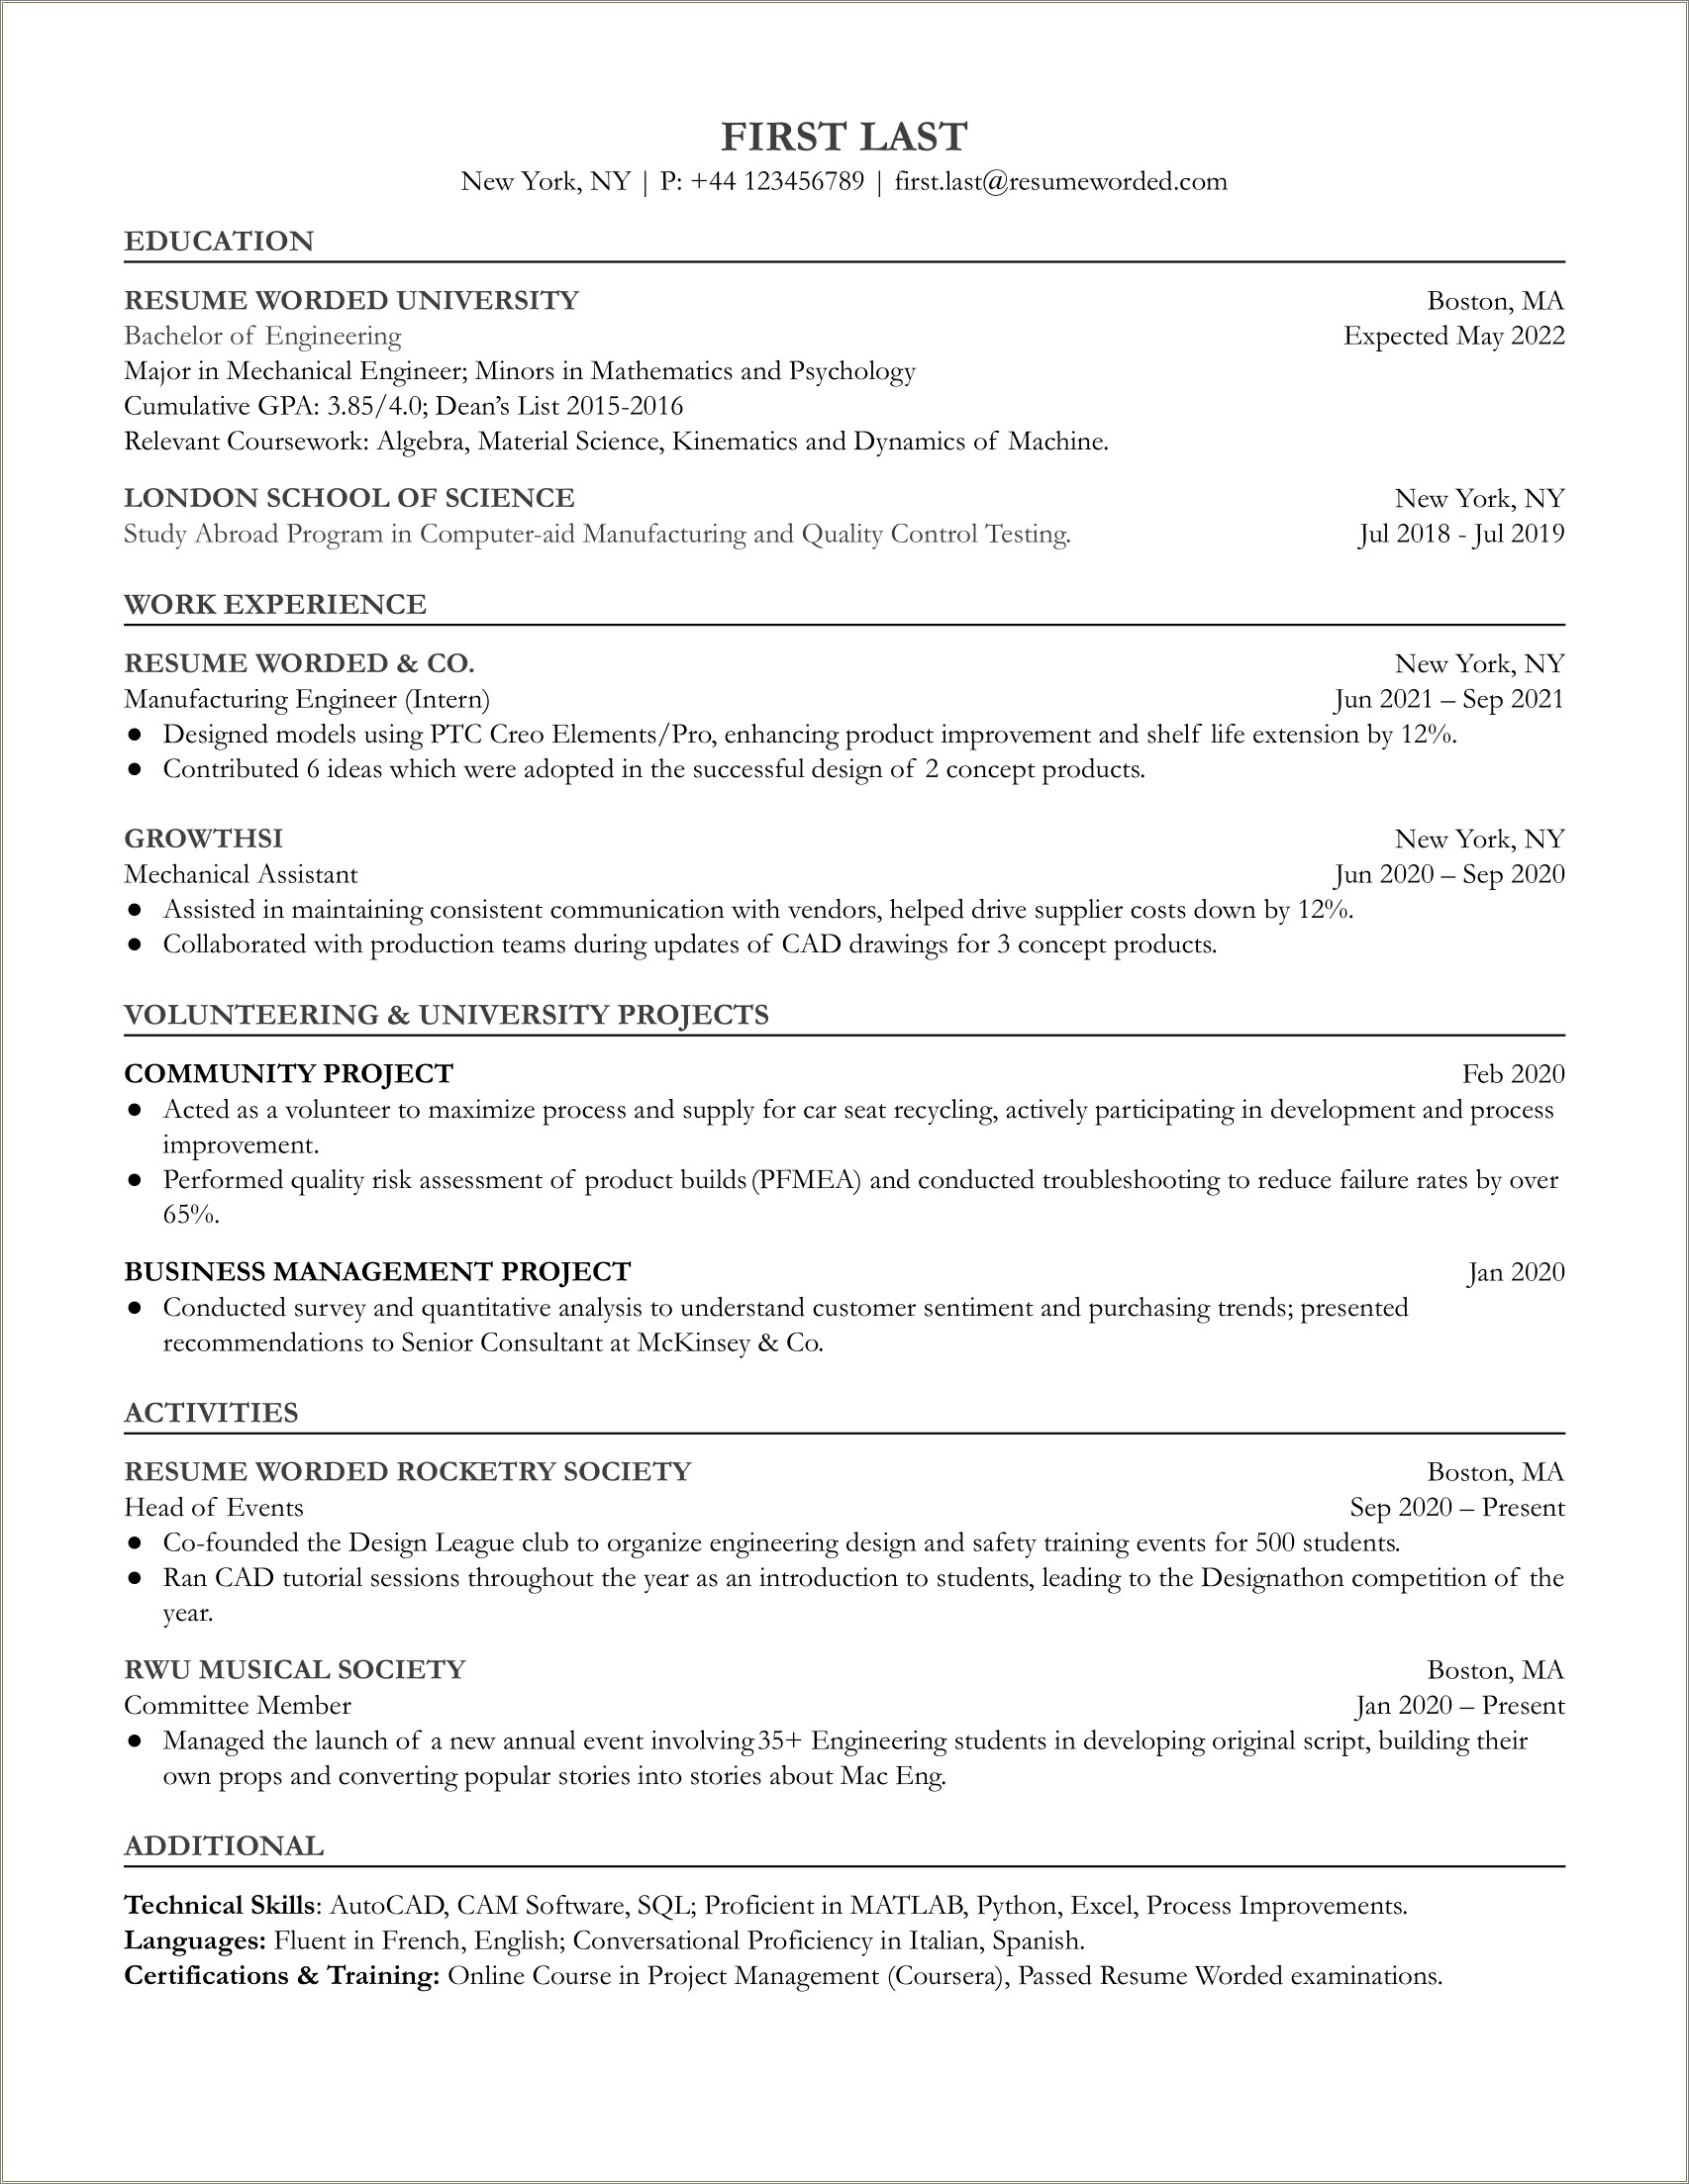 Resume Summary Statement For Manufacturing Engineer